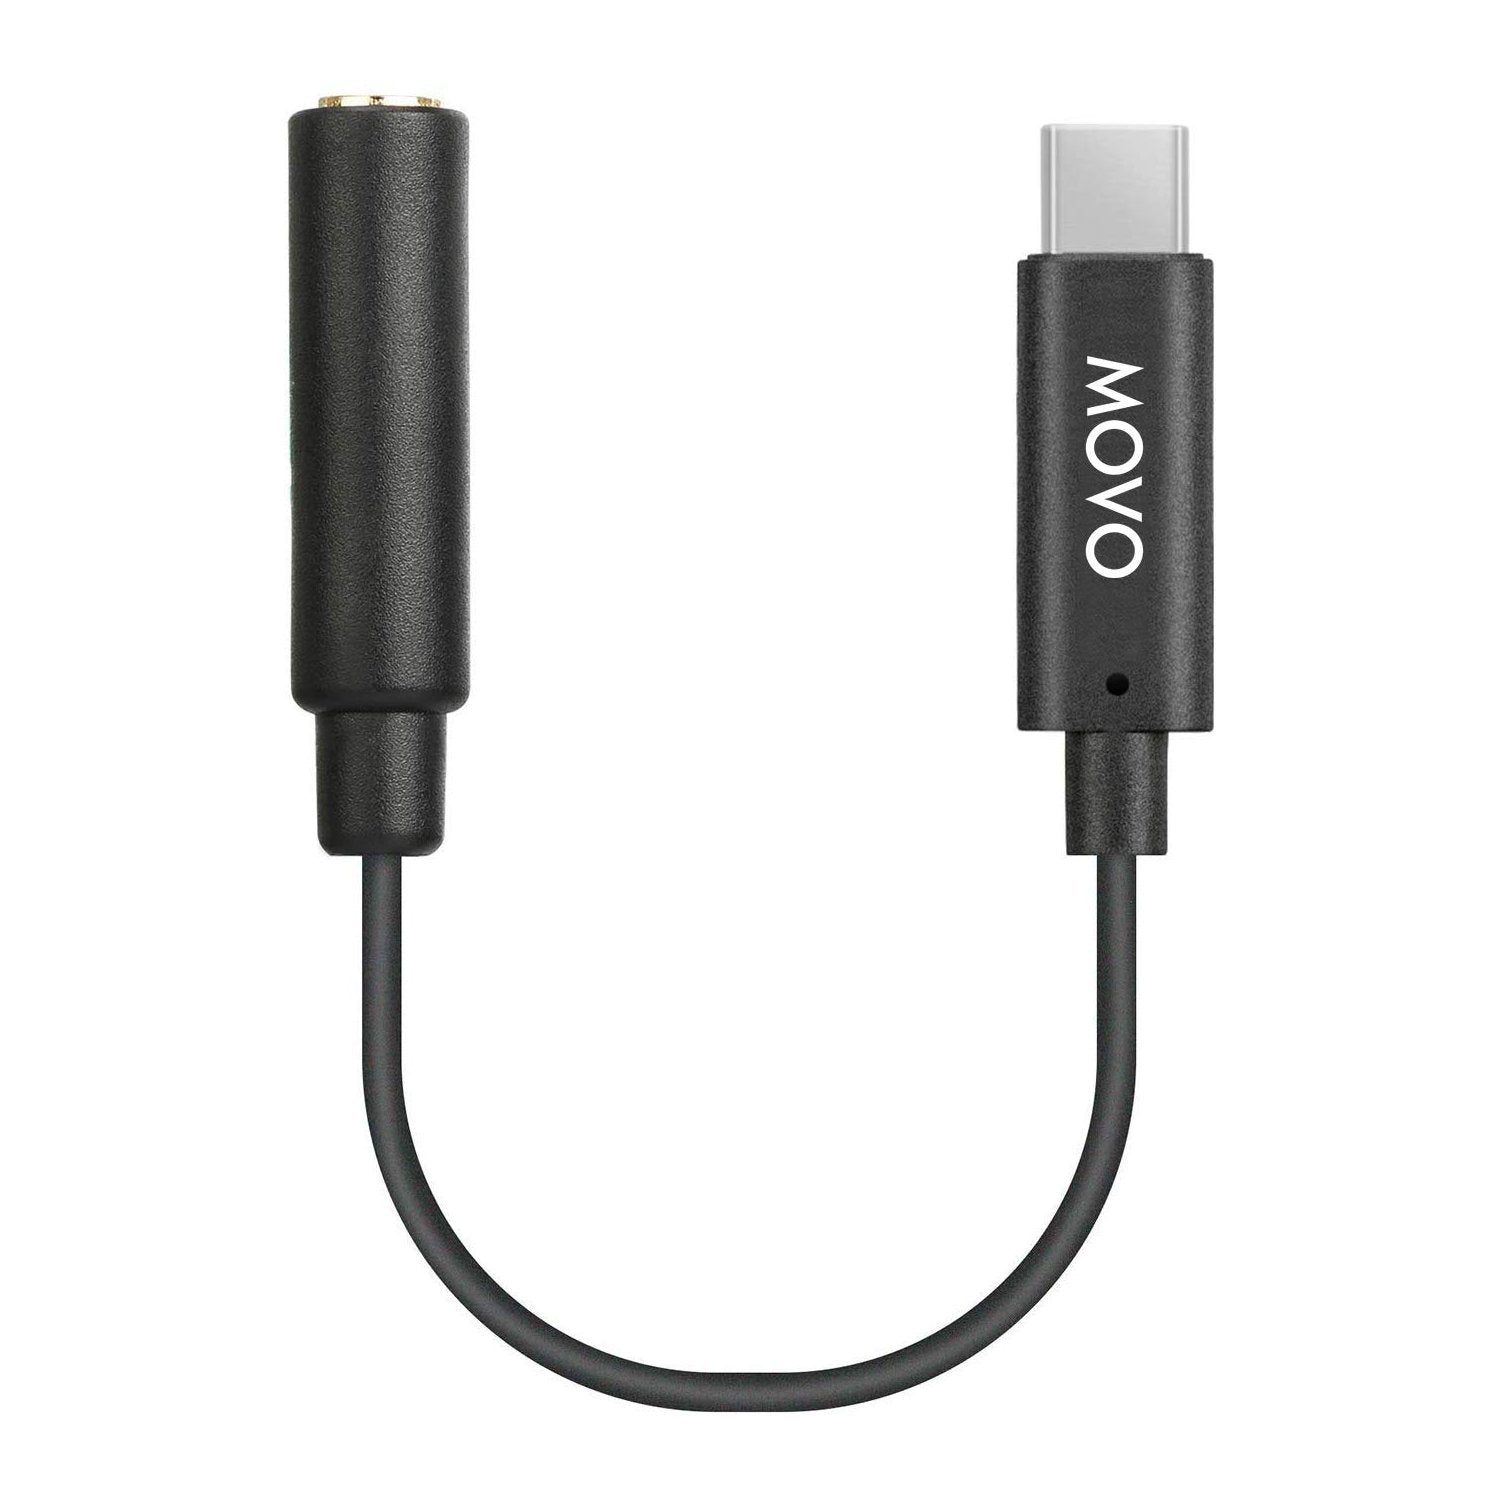 UCMA-1 | USB-C to 3.5mm TRS Microphone Adapter Cable | Movo